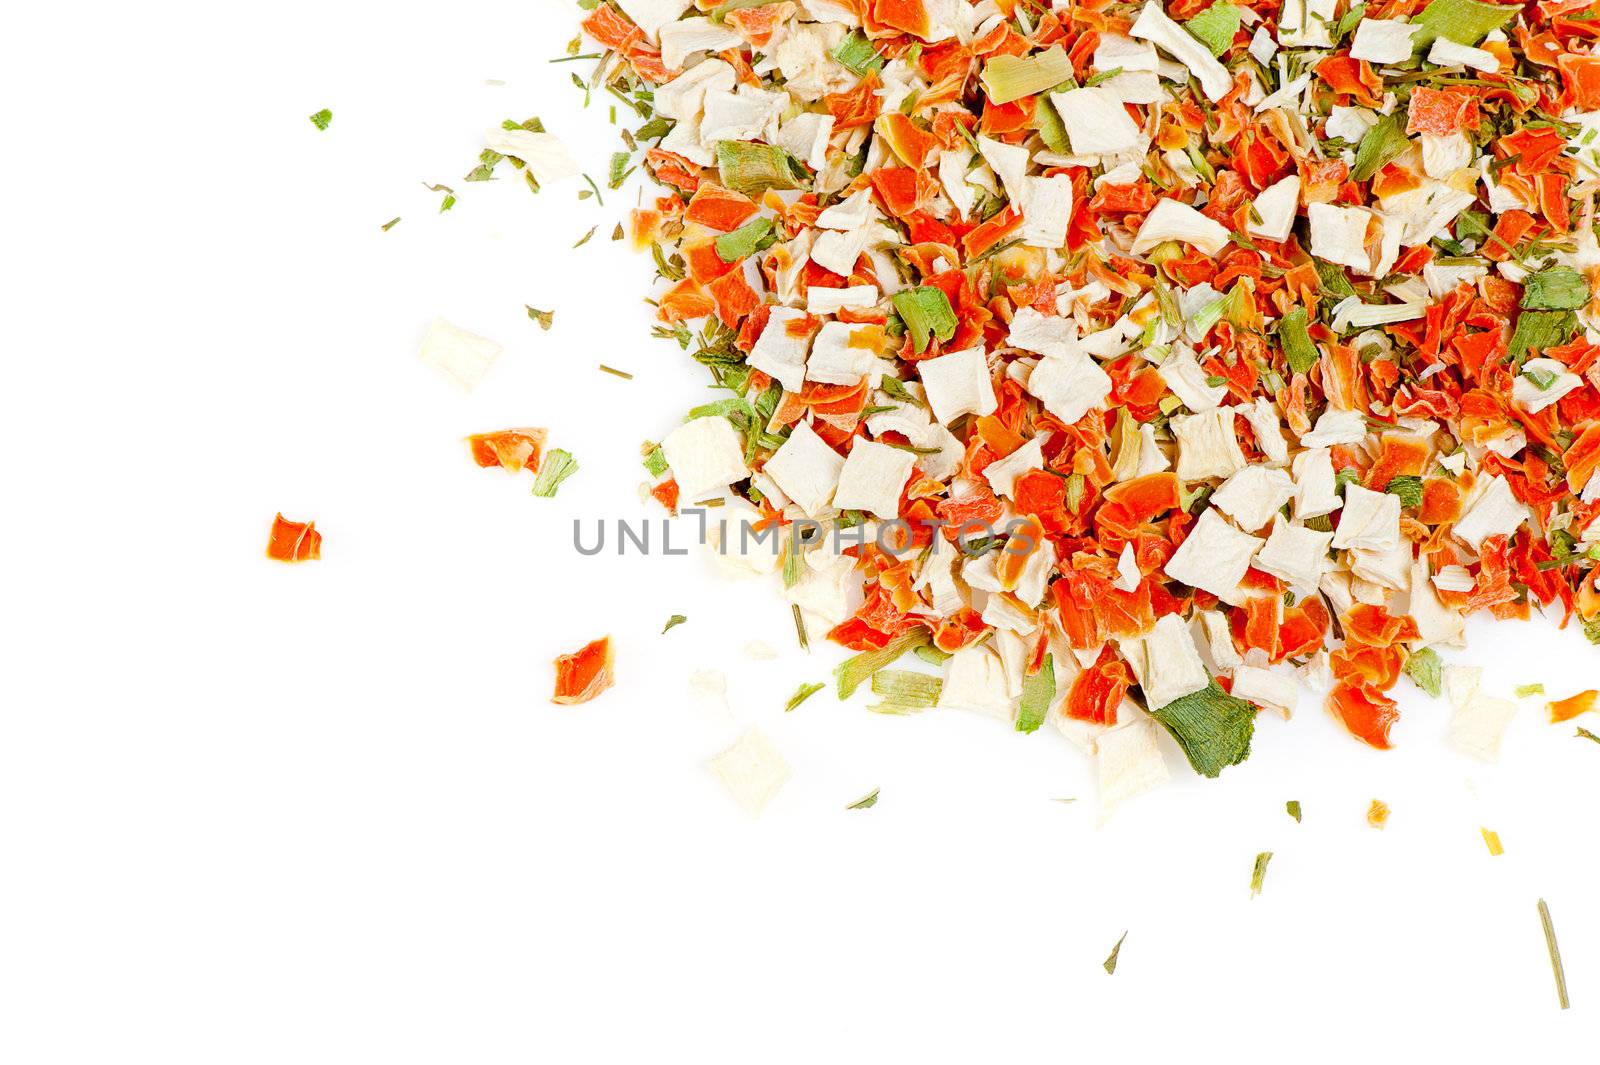 Dry spices. A set of colour dried seasonings isolated on a white background